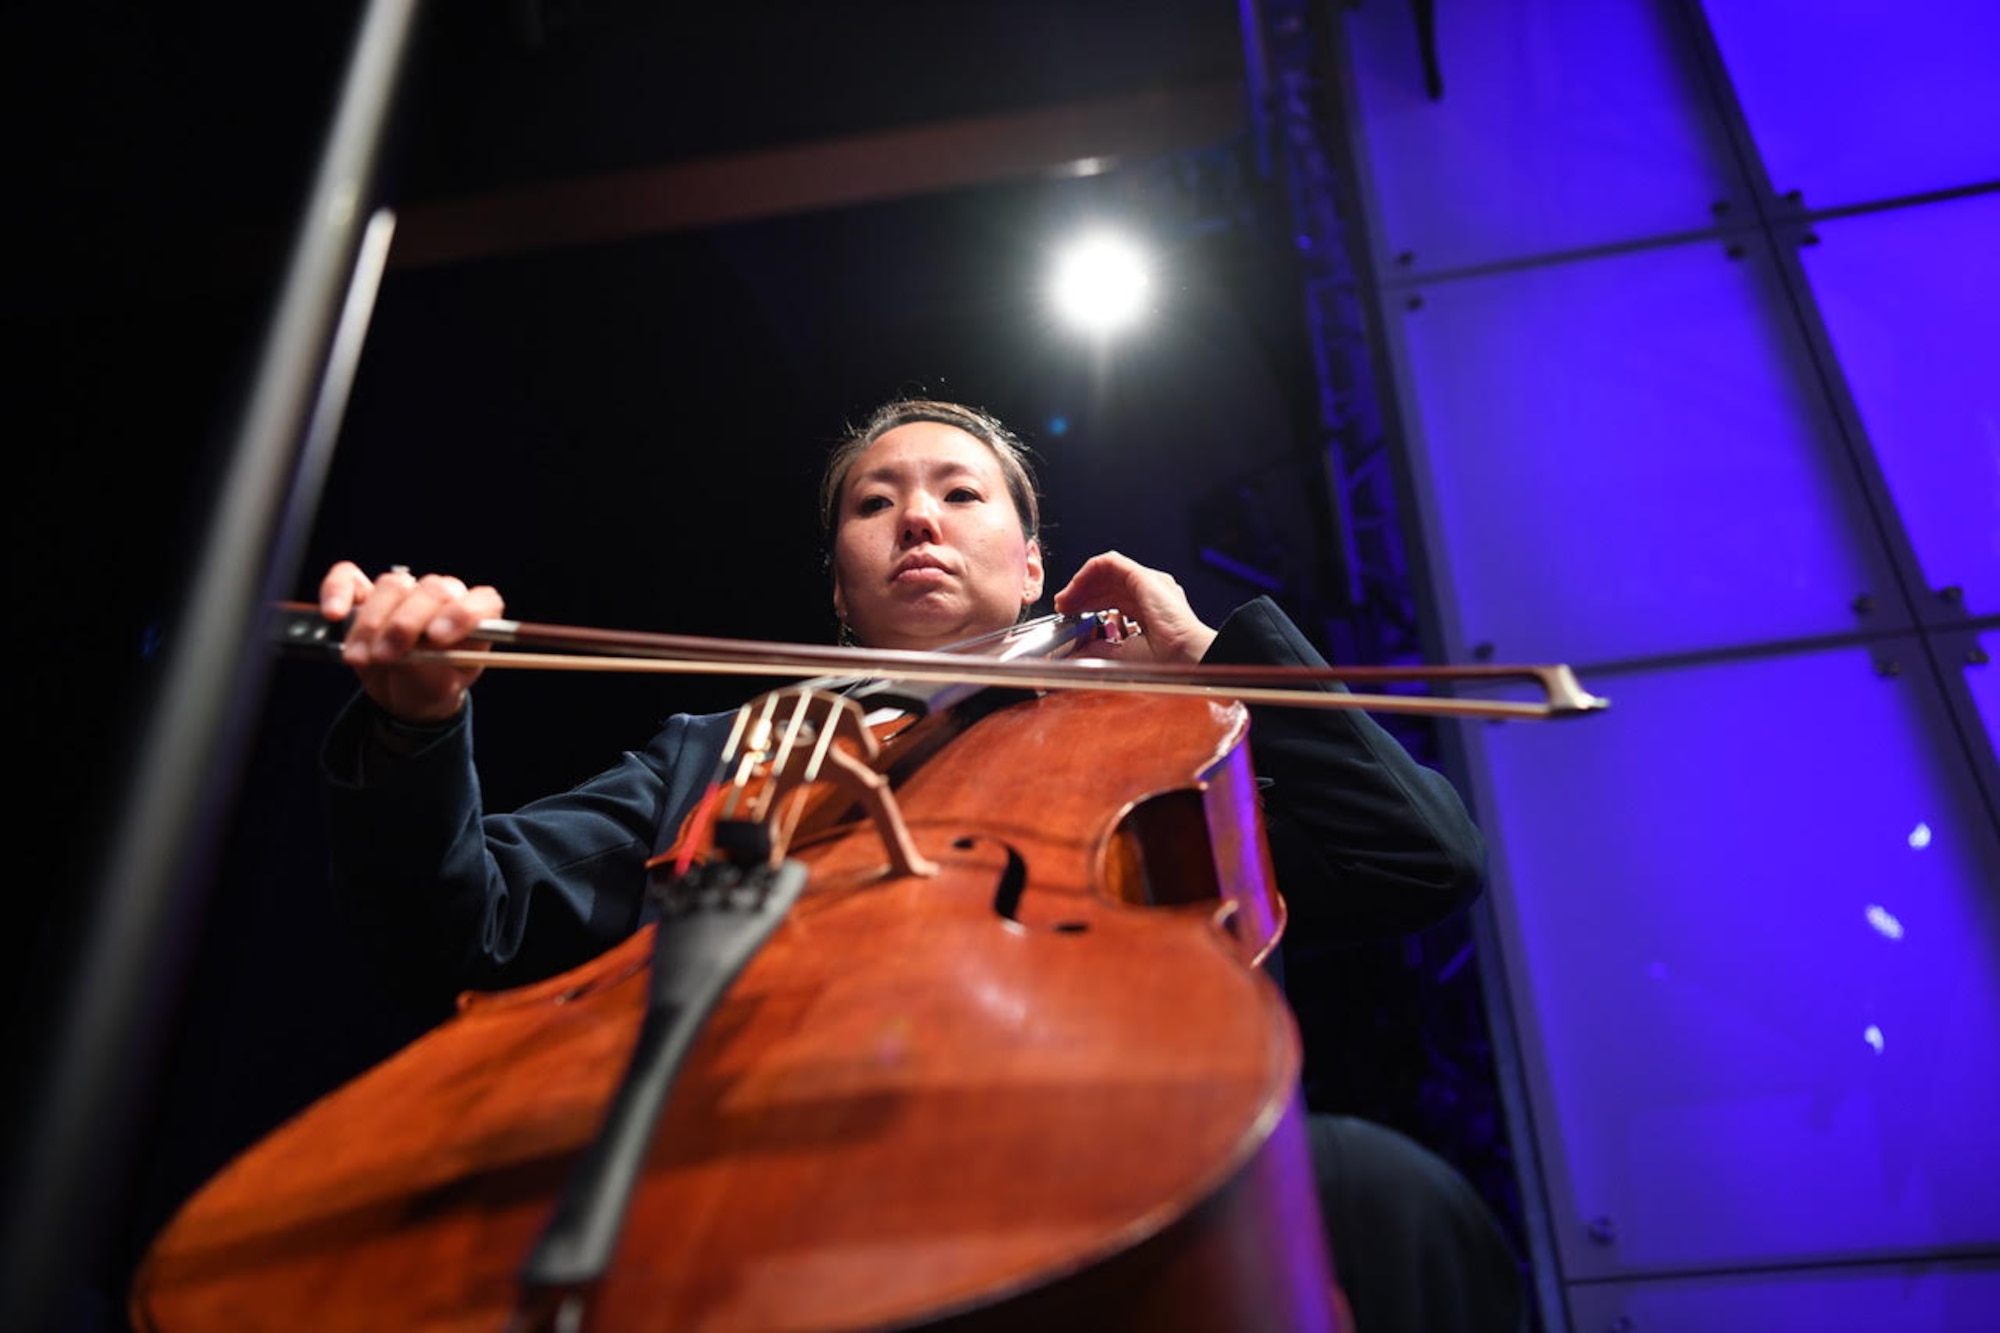 Christine Lightner, Principal Cellist of the Air Force Strings, performs at the Kennedy Center’s Millennium Stage. (U.S. Air Force photo by Airmen 1st Class Spencer Slocum)